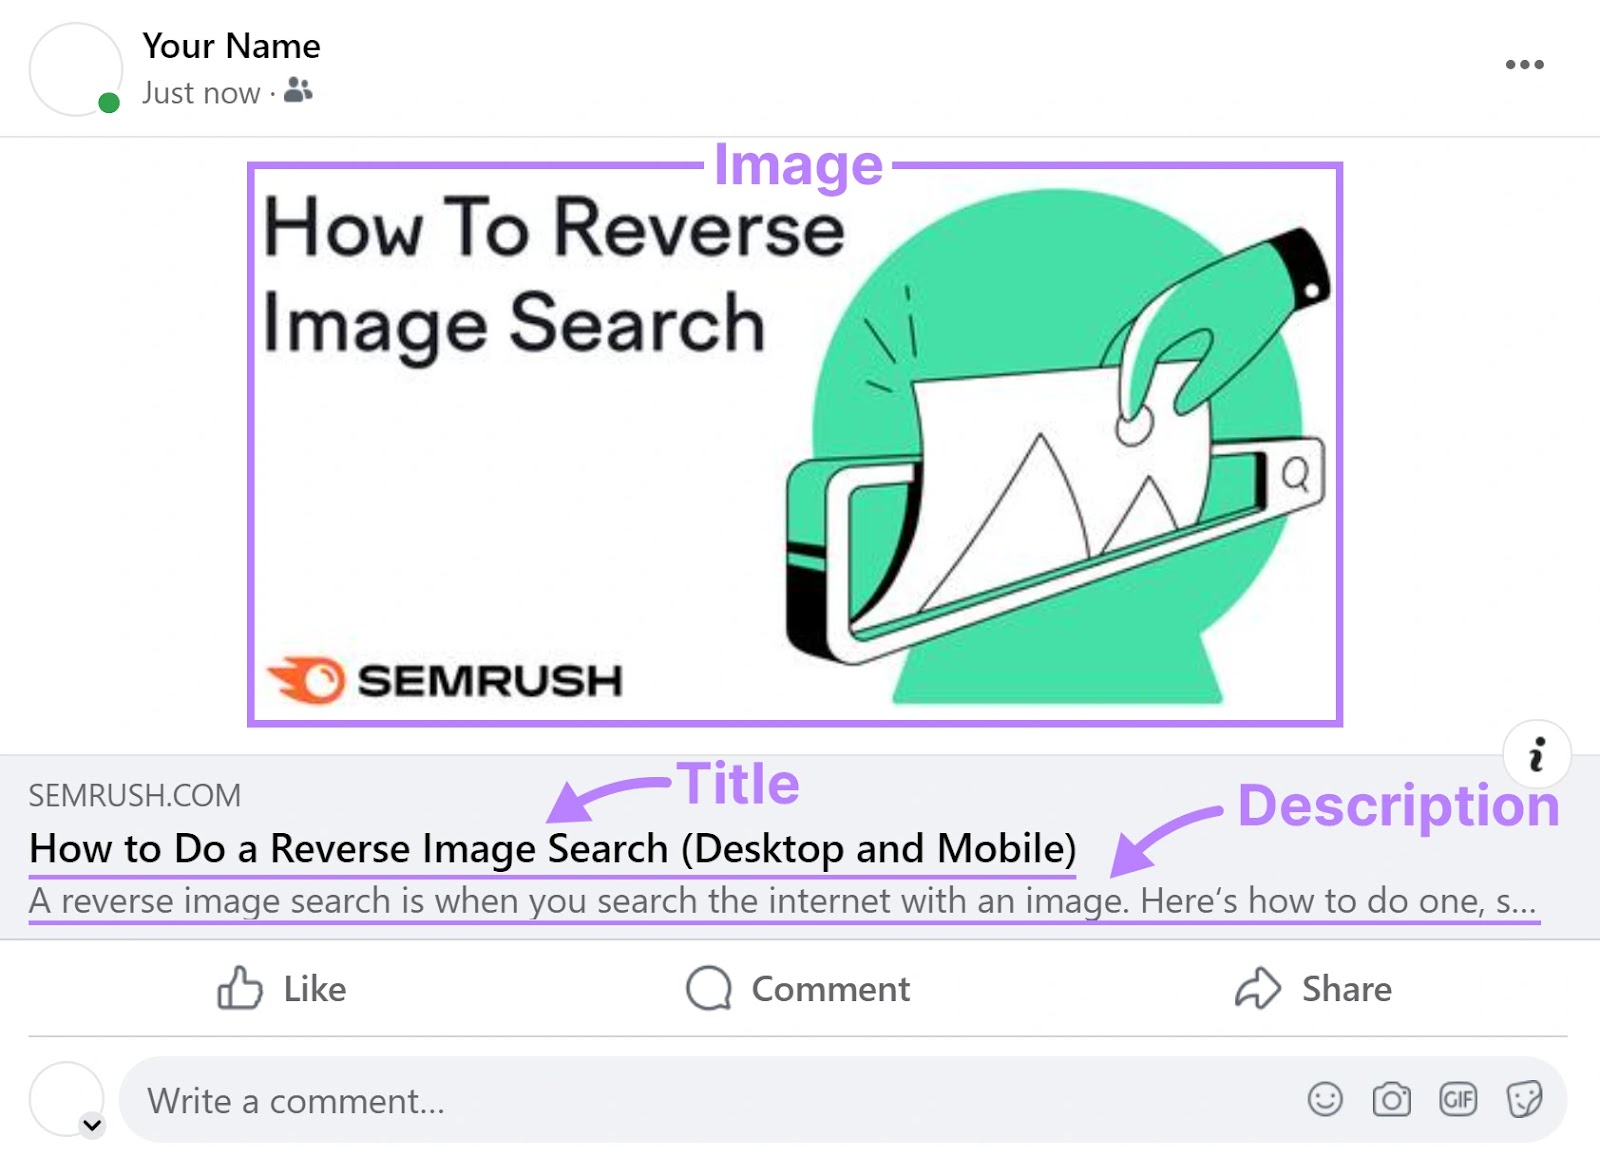 An example of Semrush's article on "How To Reverse Image Search" appearing on Facebook, with image, title and description sections highlighted